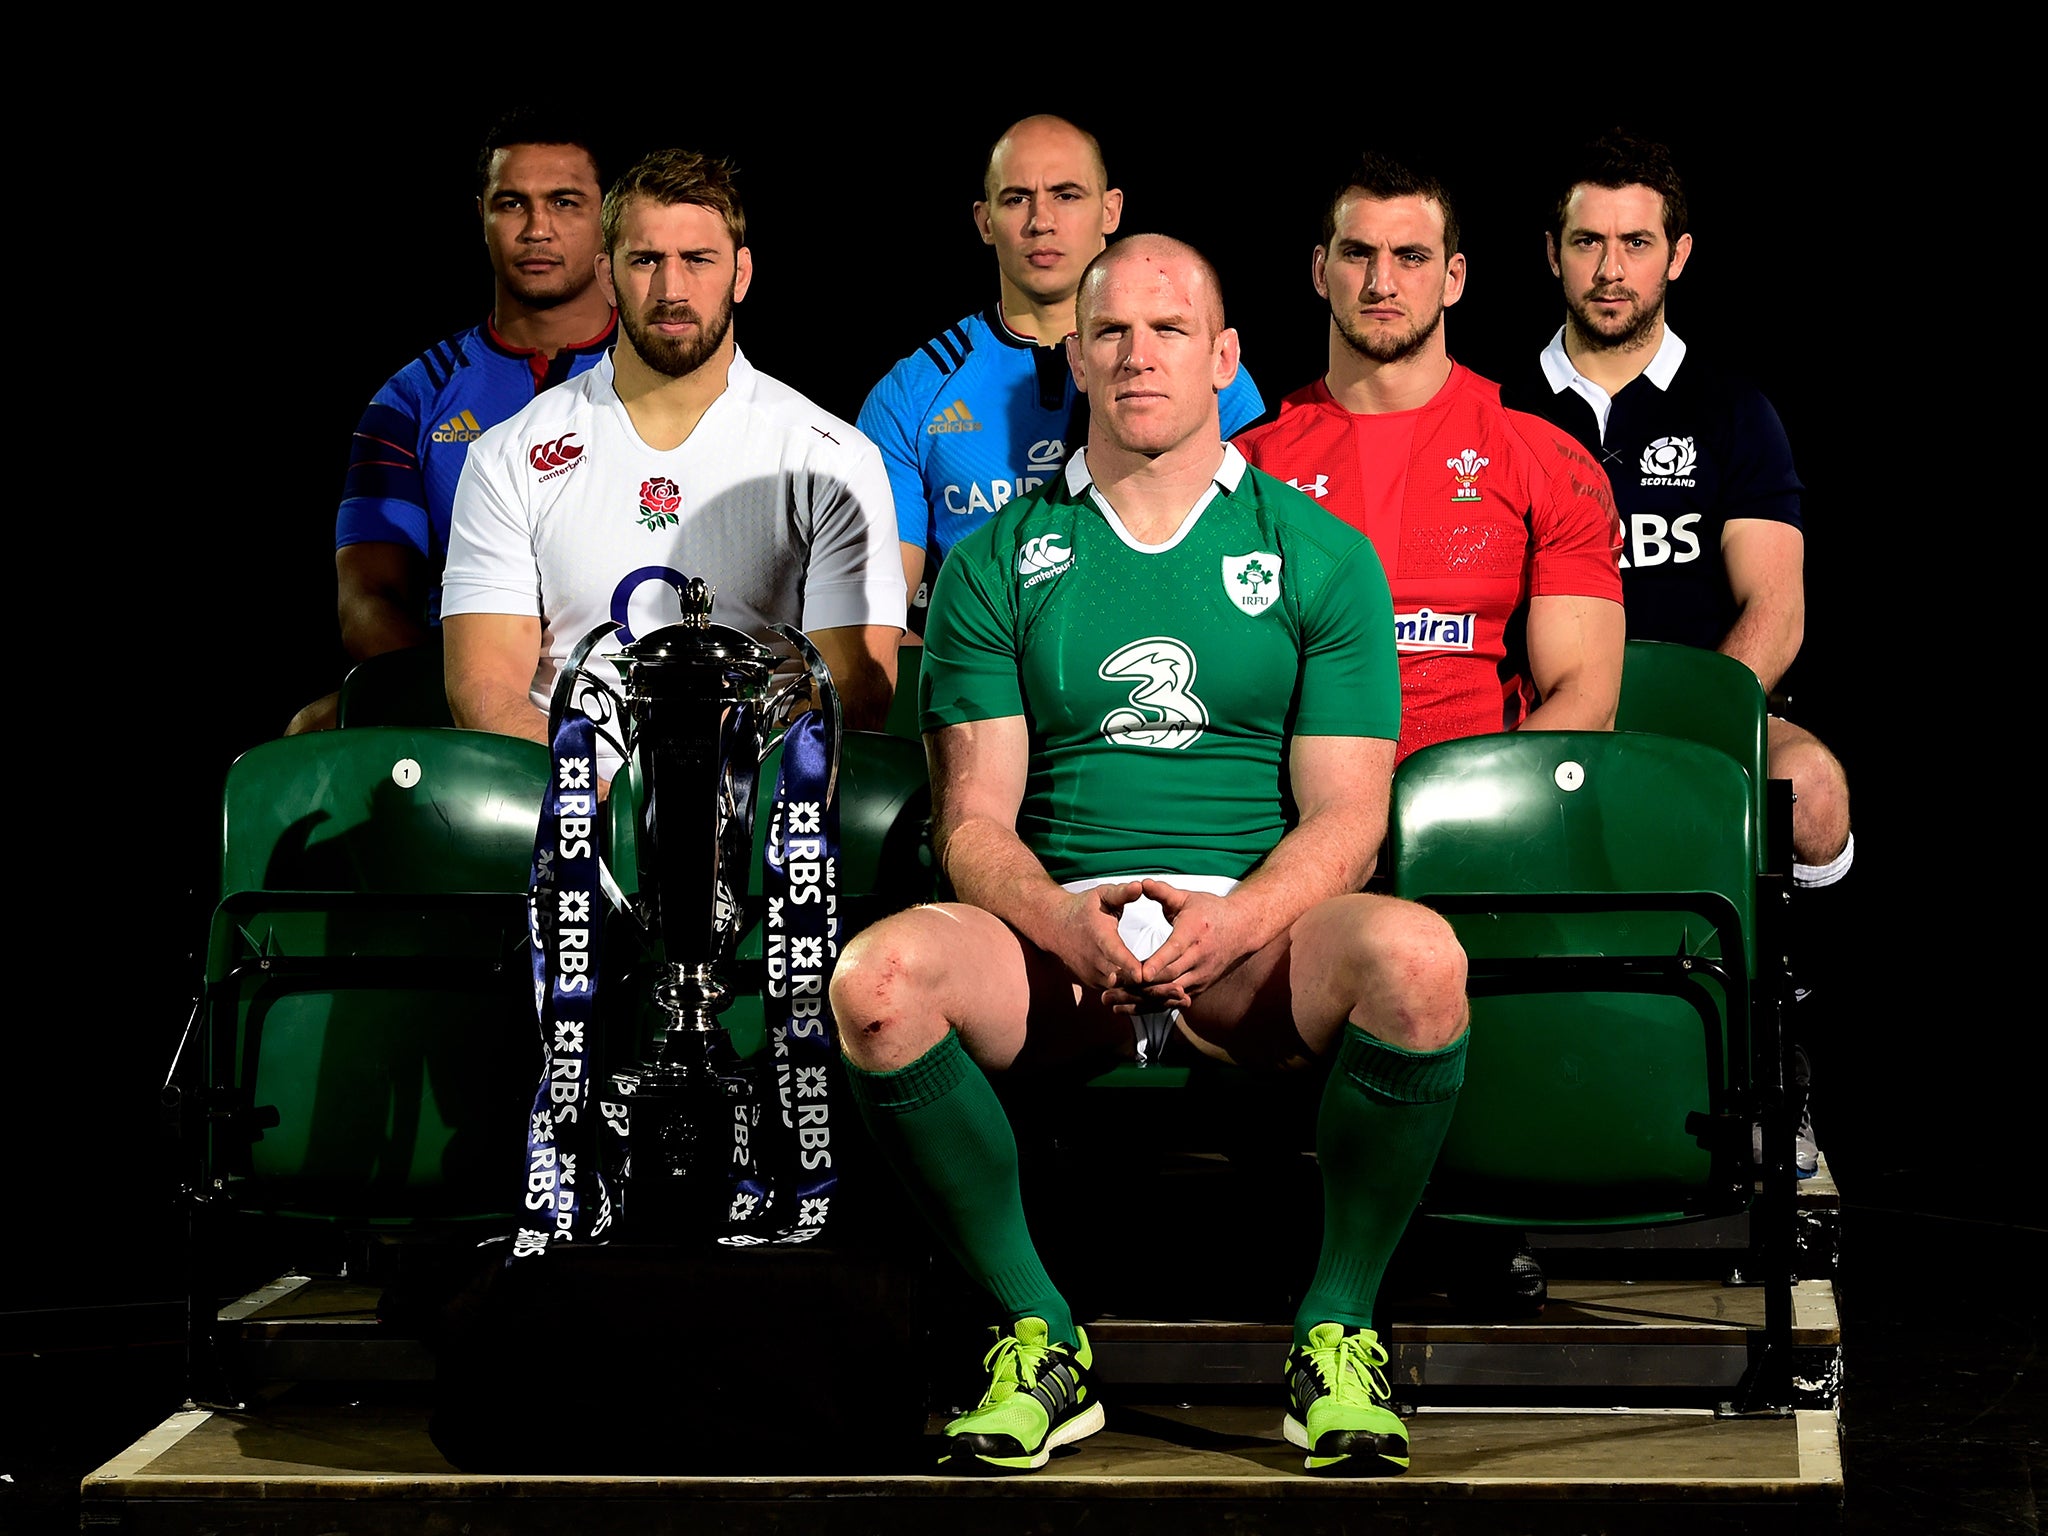 (L-R) Thierry Dusautoir of France, Chris Robshaw of England, Sergio Parisse of Italy, Paul O'Connell of Ireland, Sam Warburton of Wales and Greig Laidlaw of Scotland